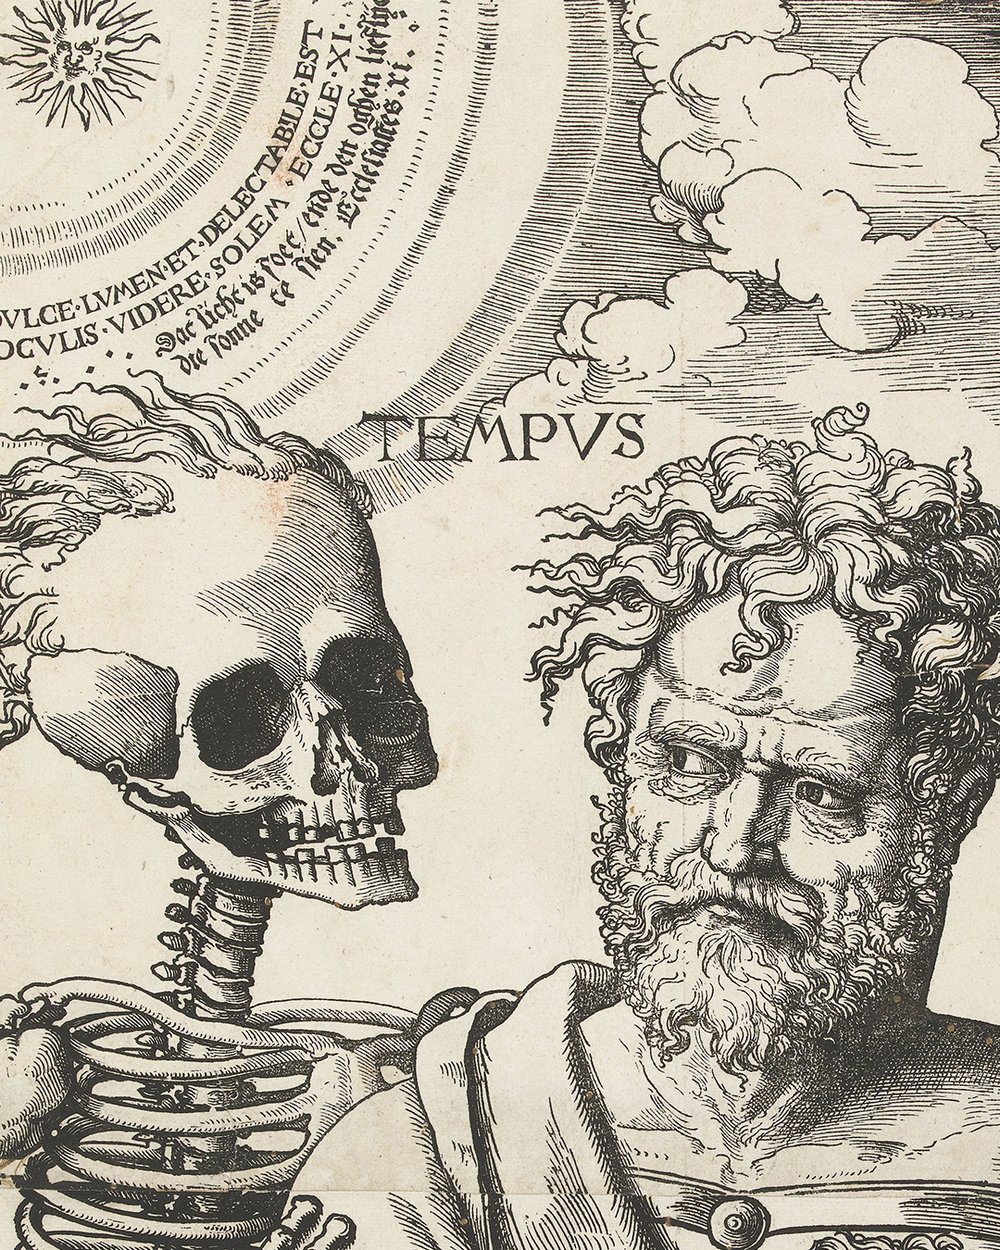 ''The transience'' (1537)